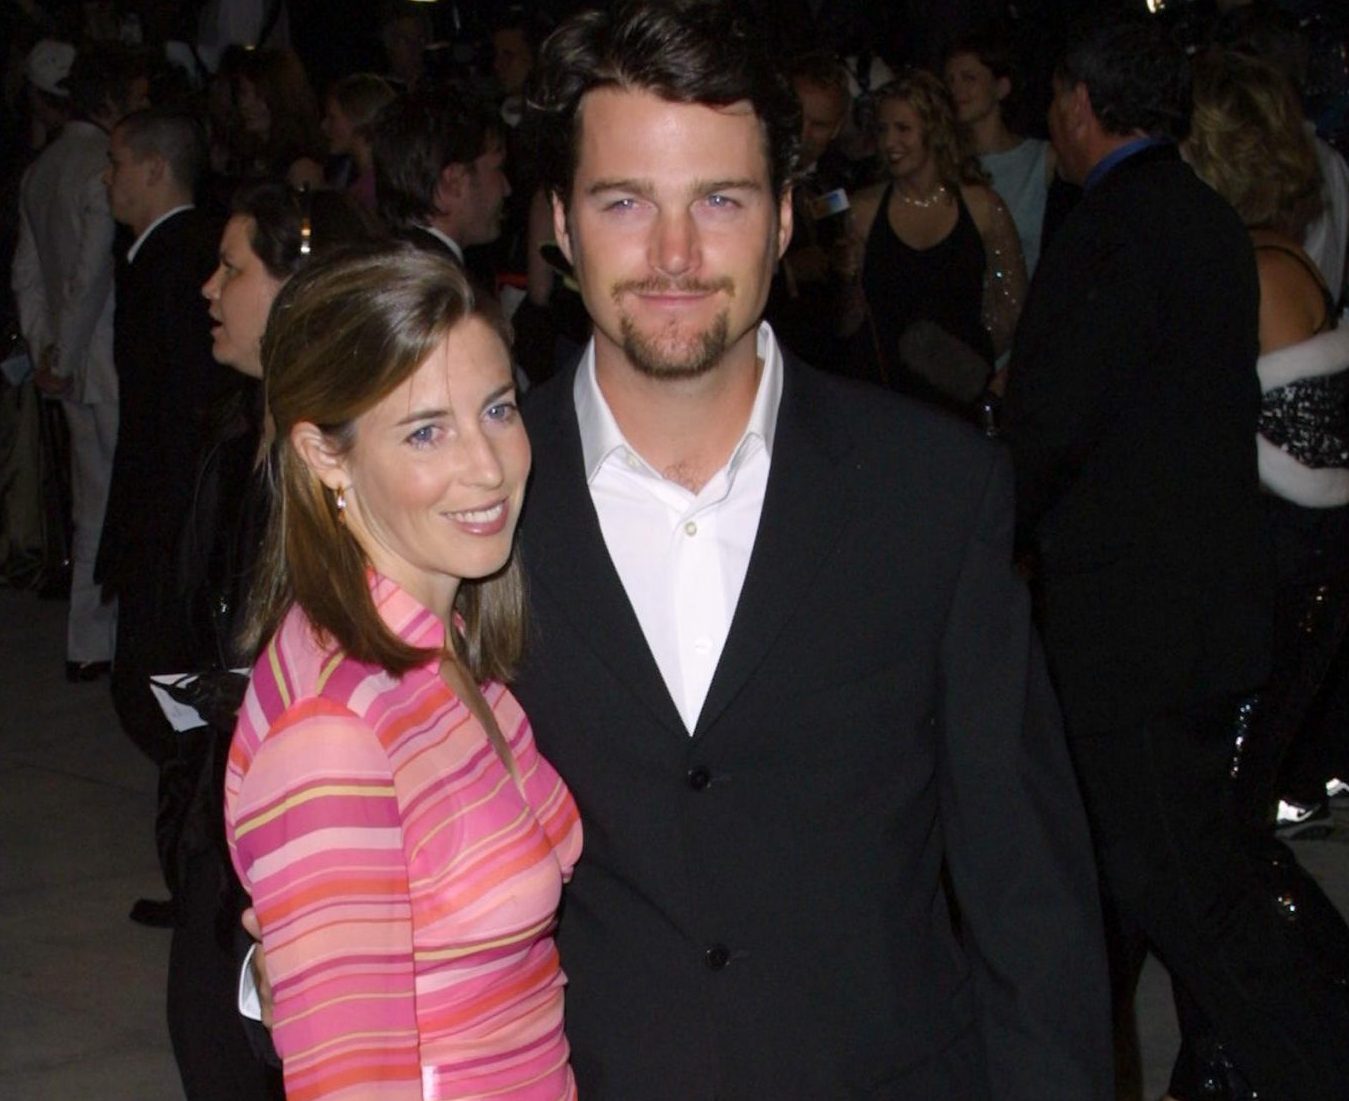 Chris O'Donnell and Caroline O'Donnell